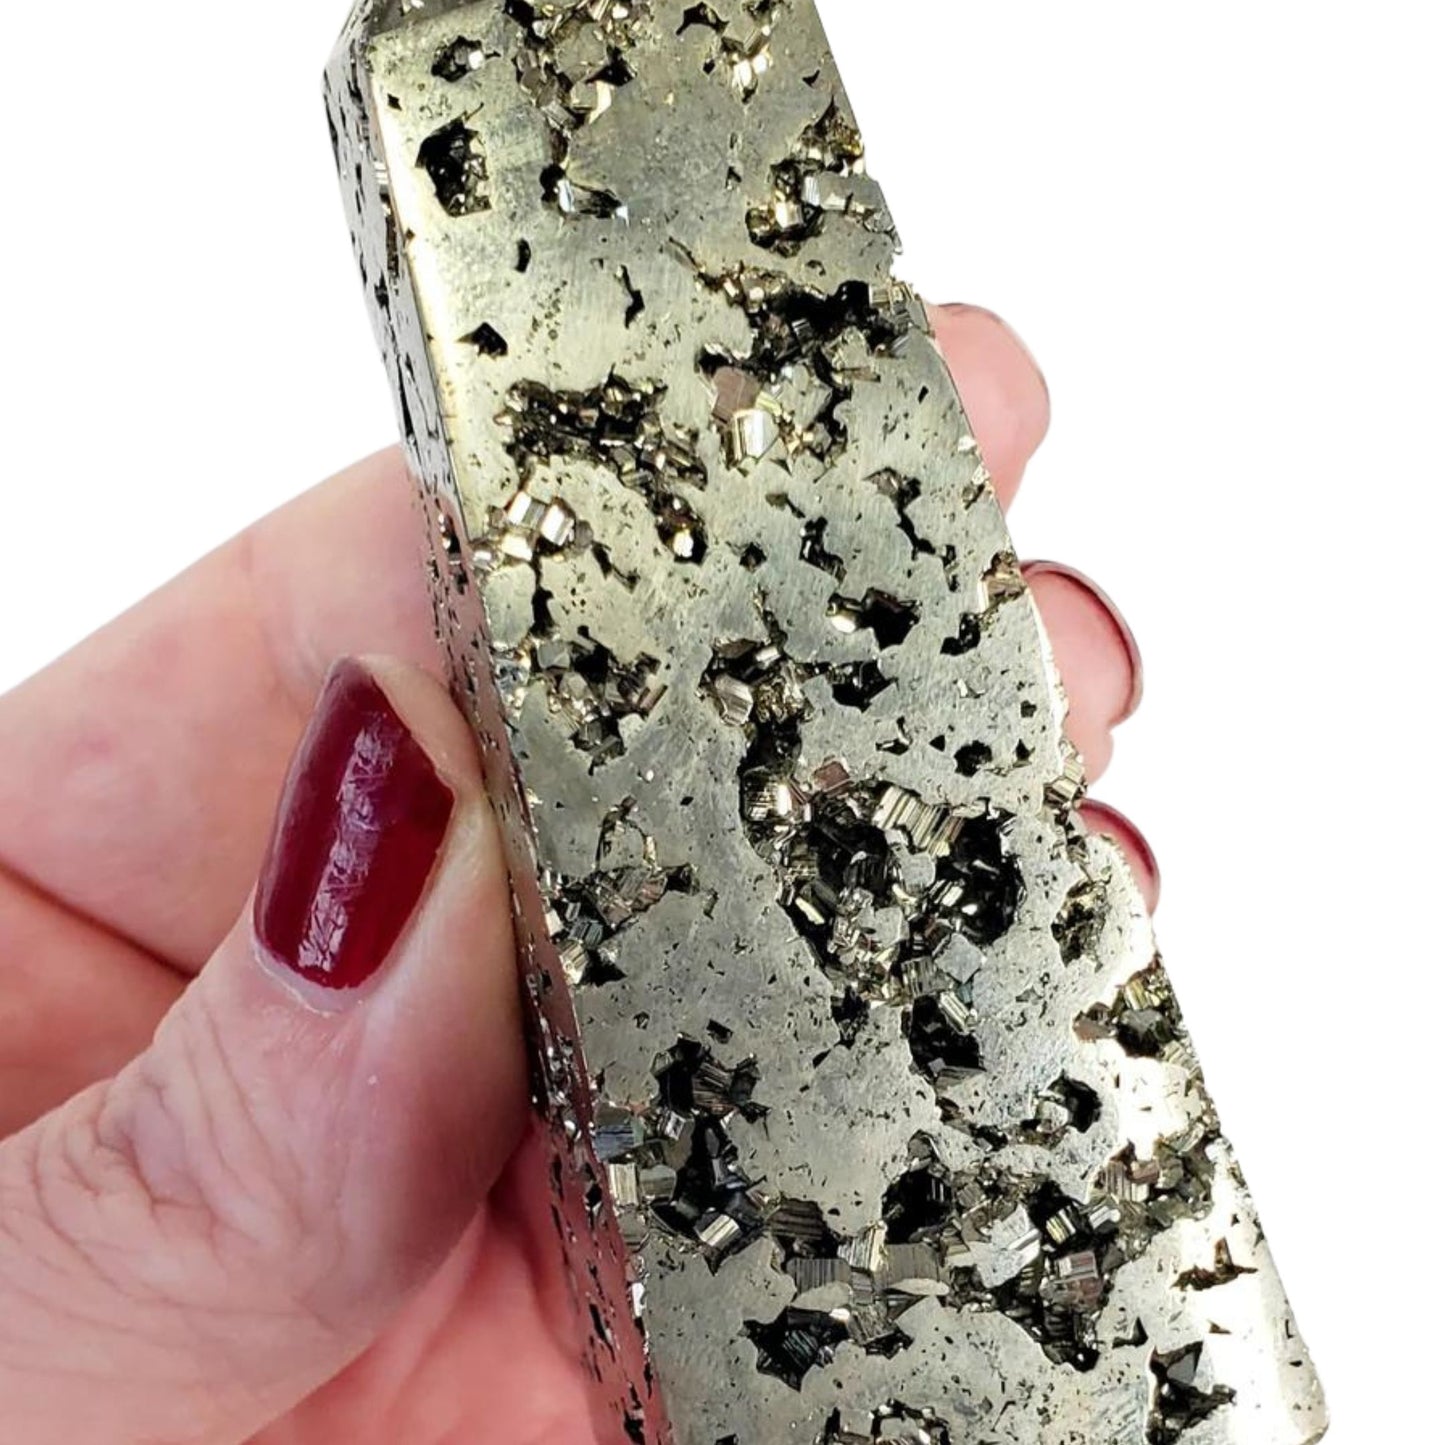 PYRITE TOWER FOR ATTRACTING MONEY